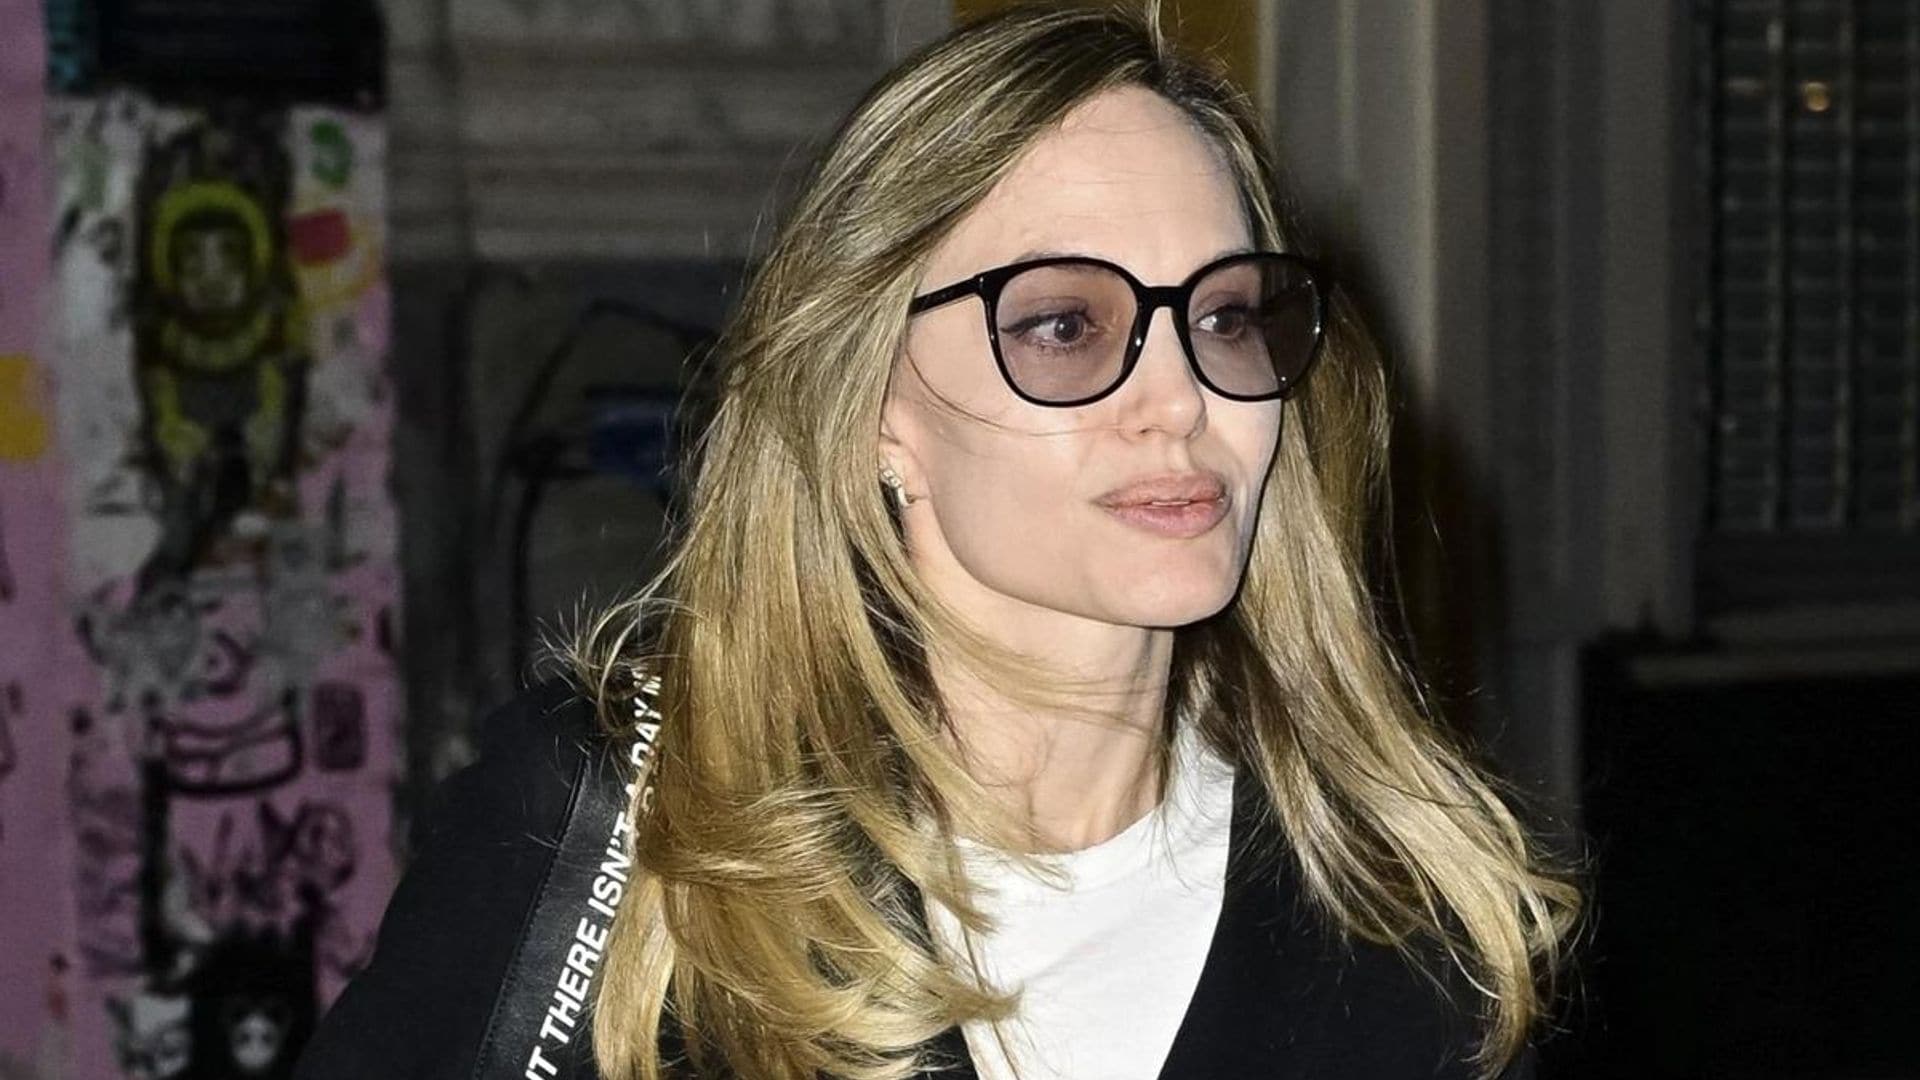 Angelina Jolie shows off new look as she visits Atelier Jolie in New York